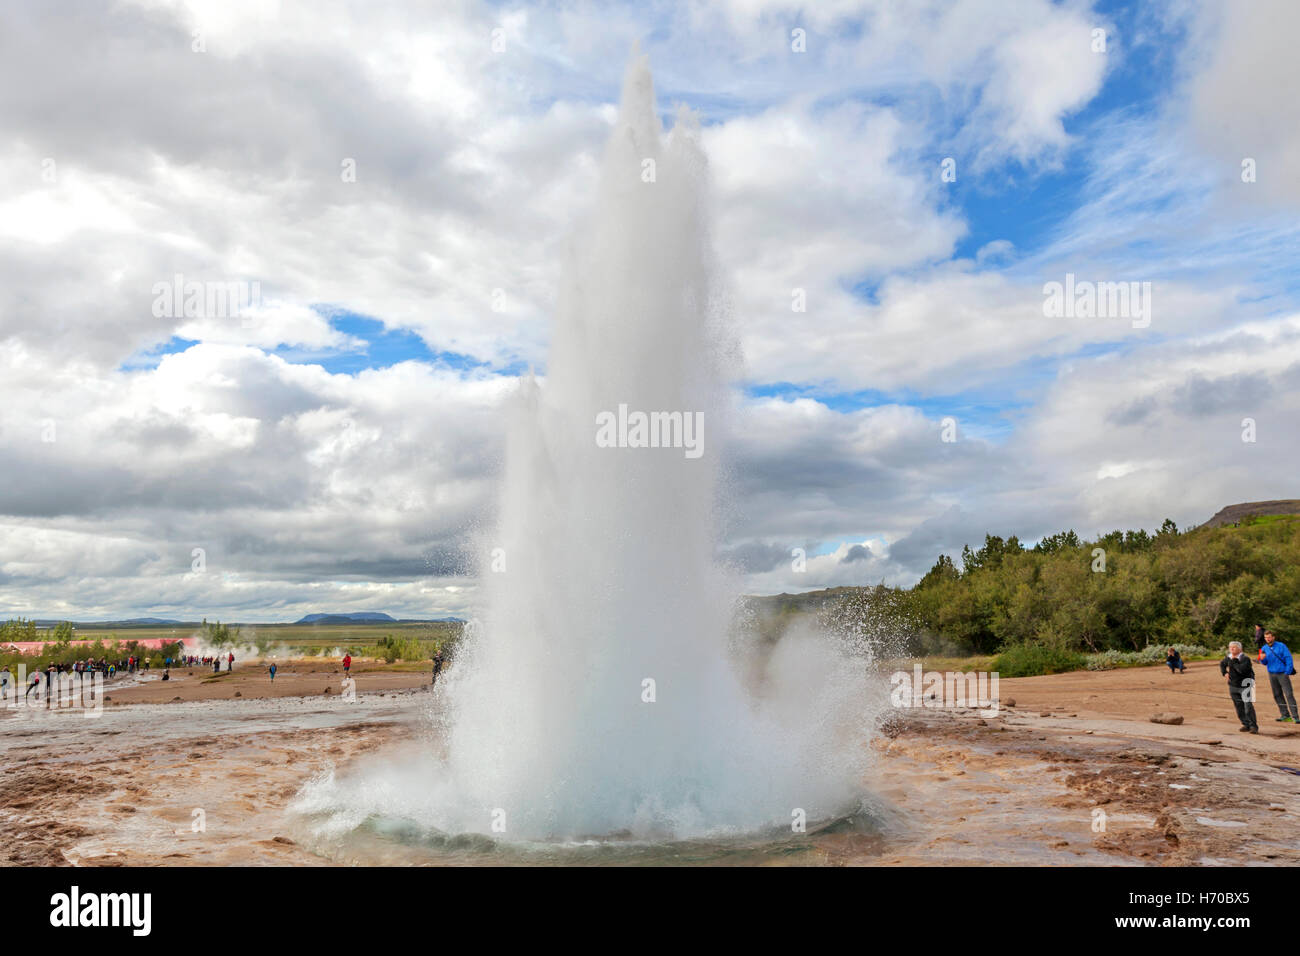 A view of the Strokkur Geysir, also known as Geyser, in Iceland. Stock Photo